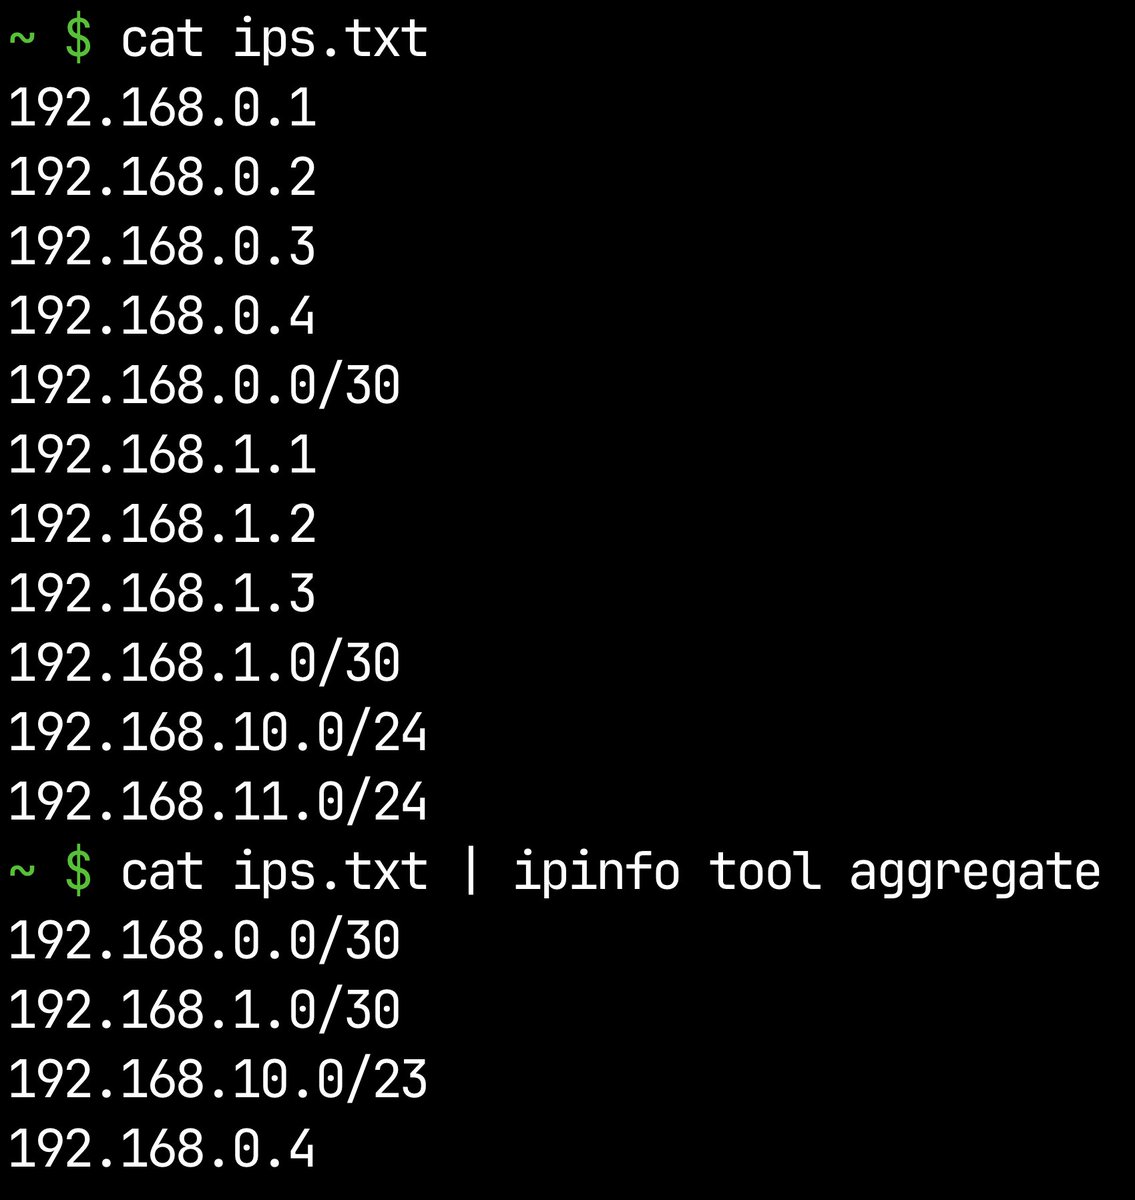 Minimize a list of IPs by merging overlapping and contiguous IP addresses and CIDRs with the aggregate tool, One of the many handy tools in the ipinfo CLI! Here's 'ipinfo tool aggregate' in action 👇